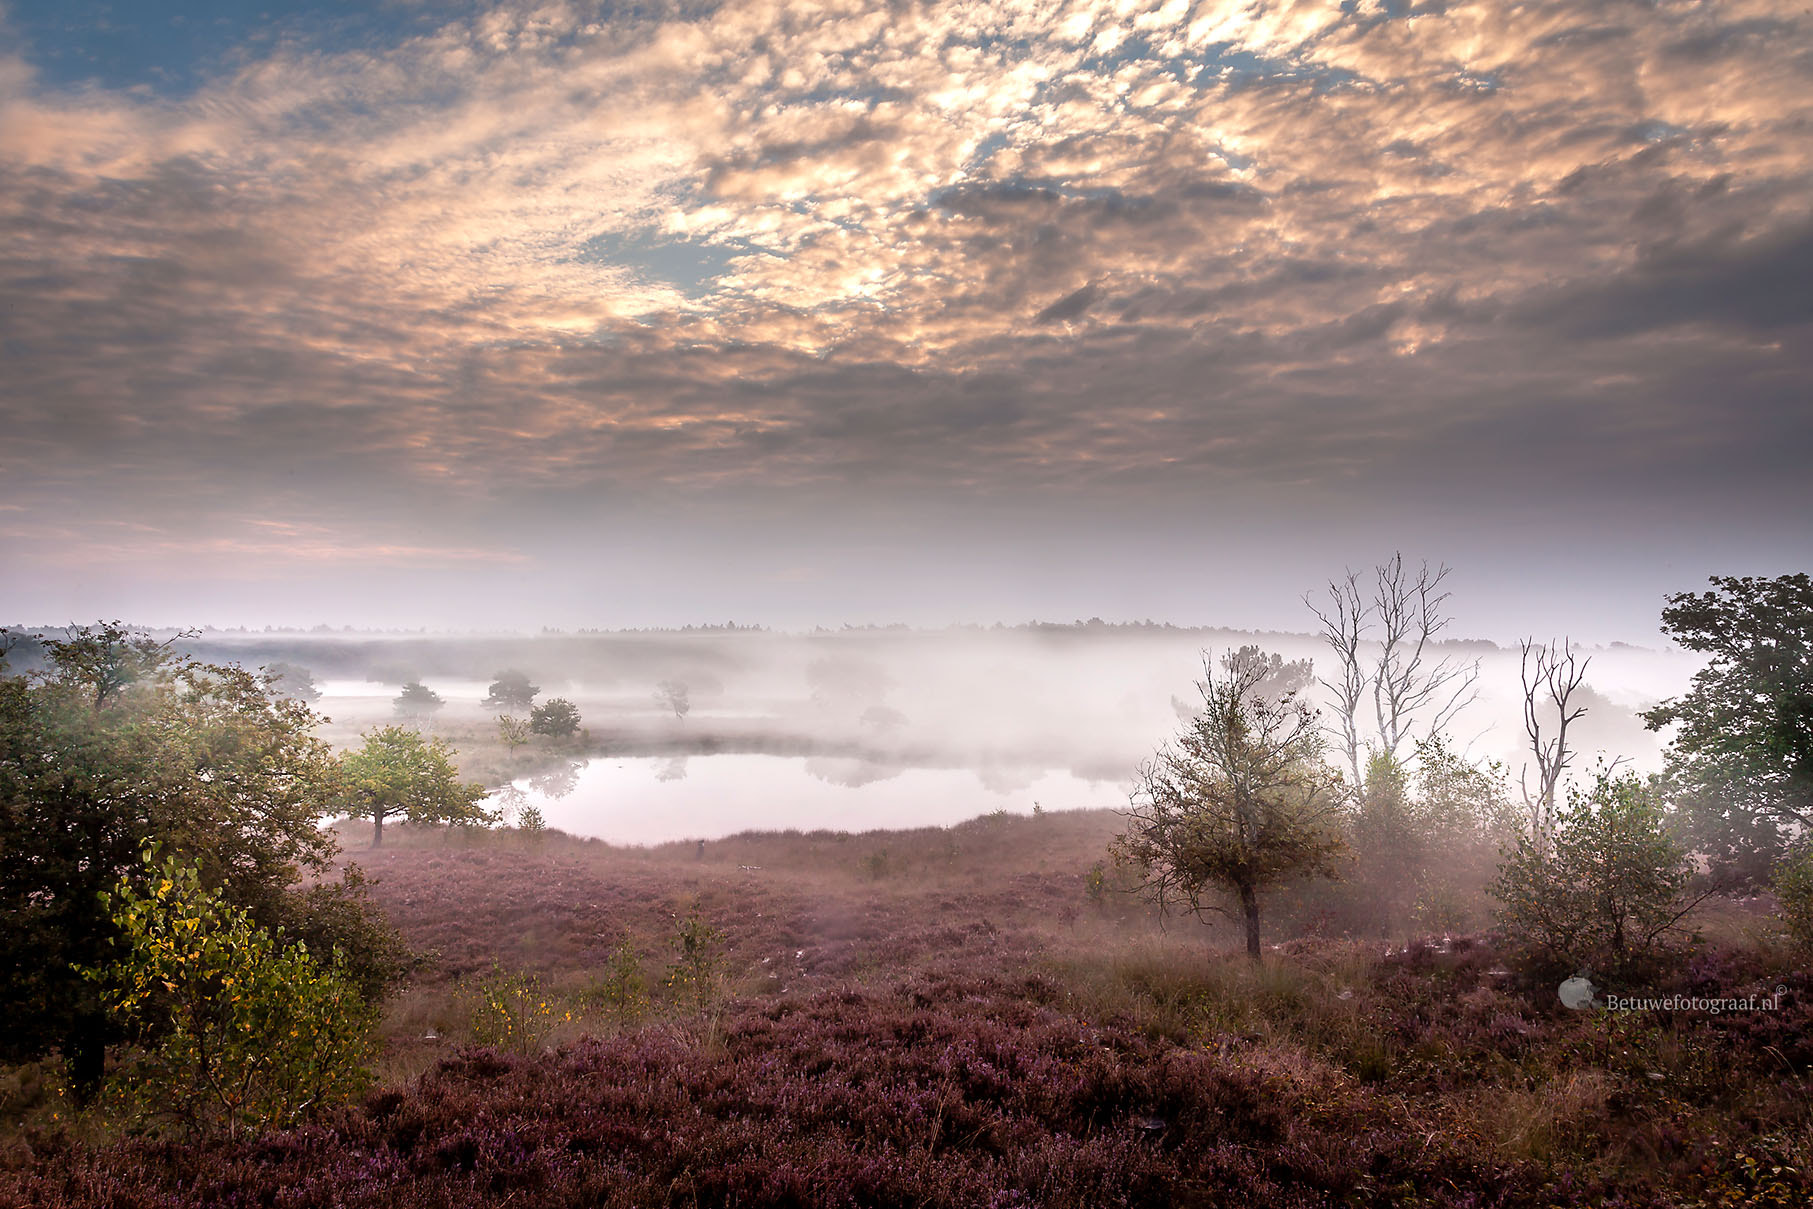 Canon EOS 5D Mark II + Sigma 24-105mm f/4 DG OS HSM | A sample photo. Misty landscape in holland photography